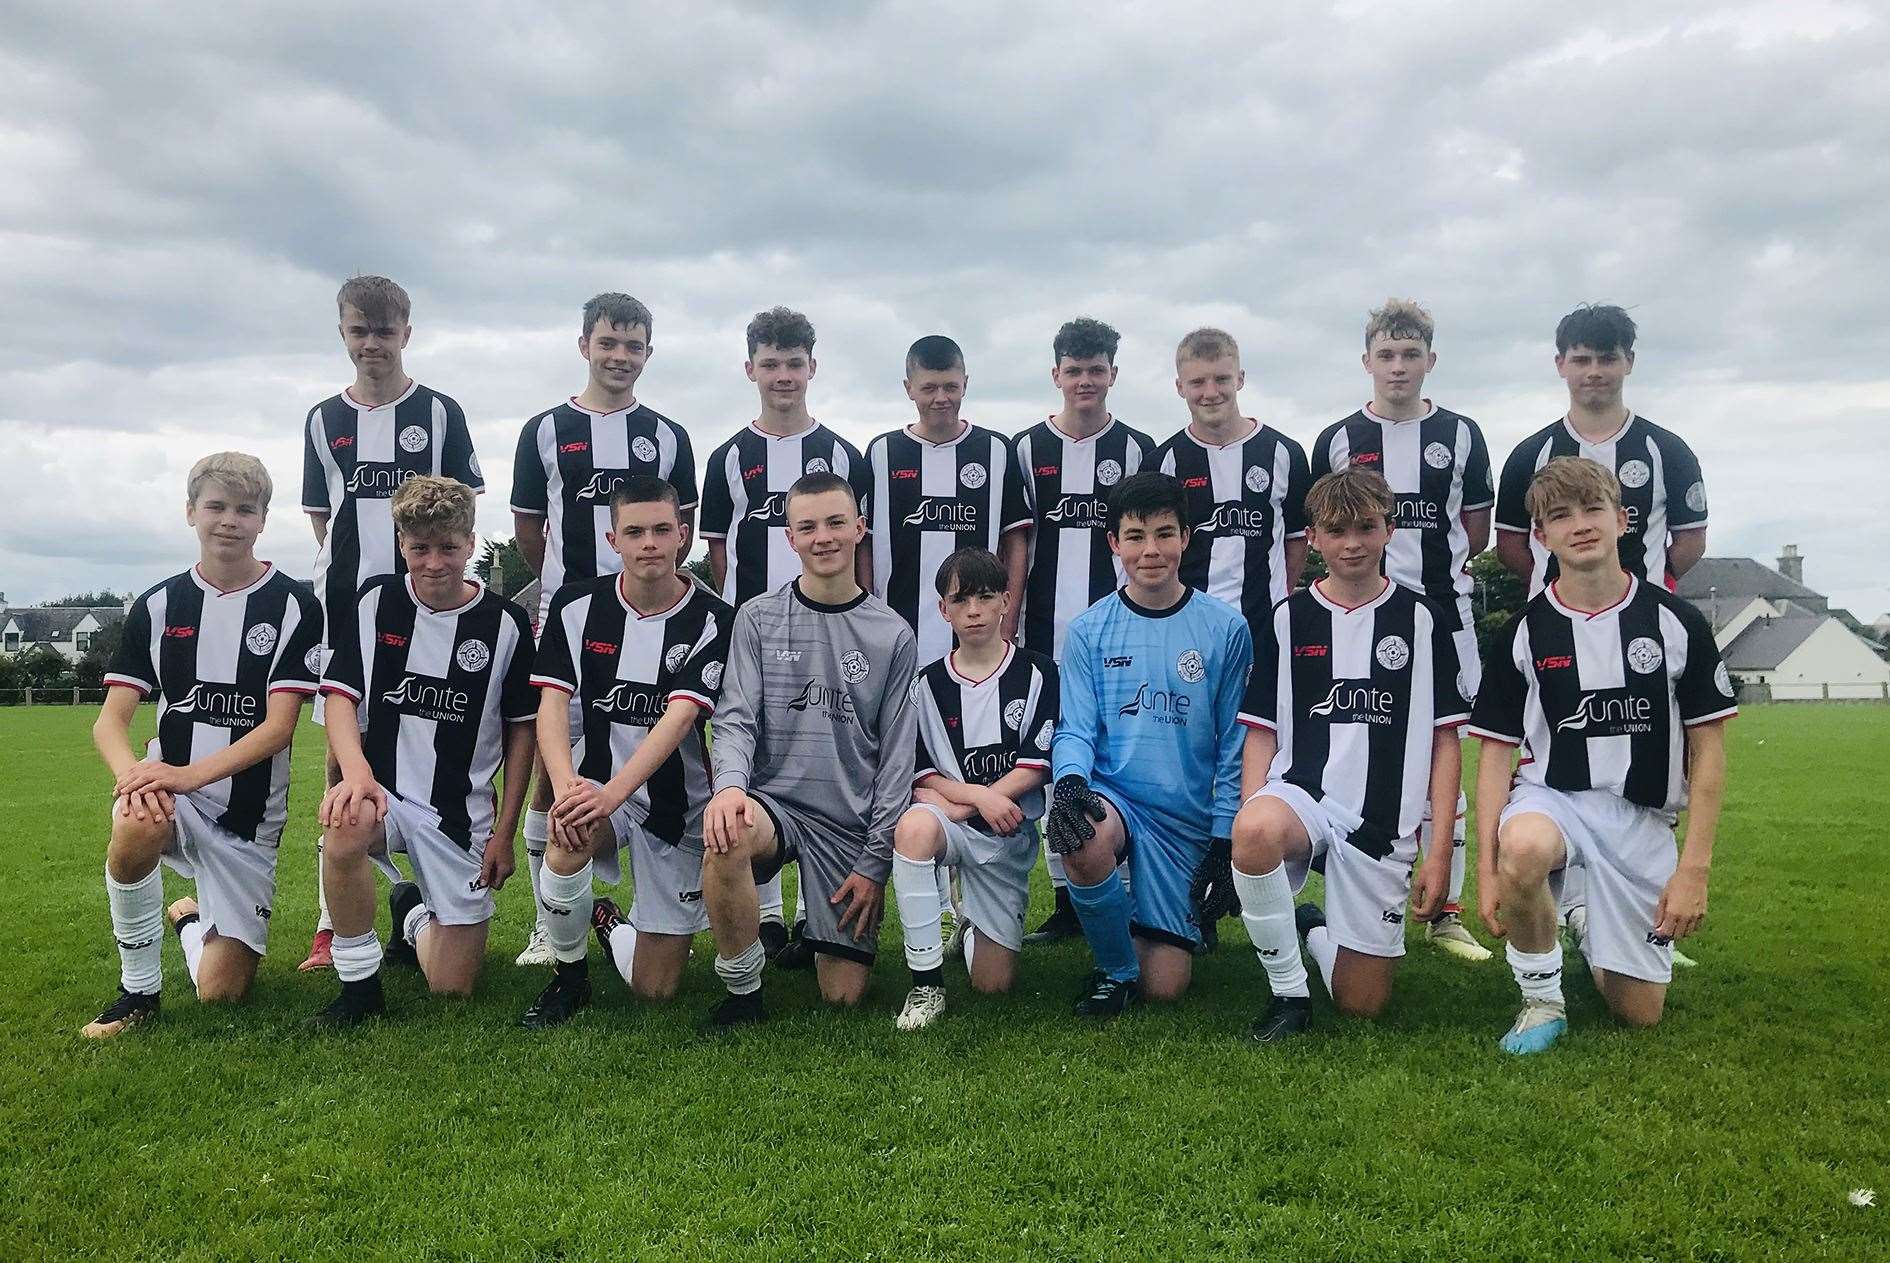 The Caithness United under-16s who defeated Nairn County in Wick in their opening Highland Youth Football League match.